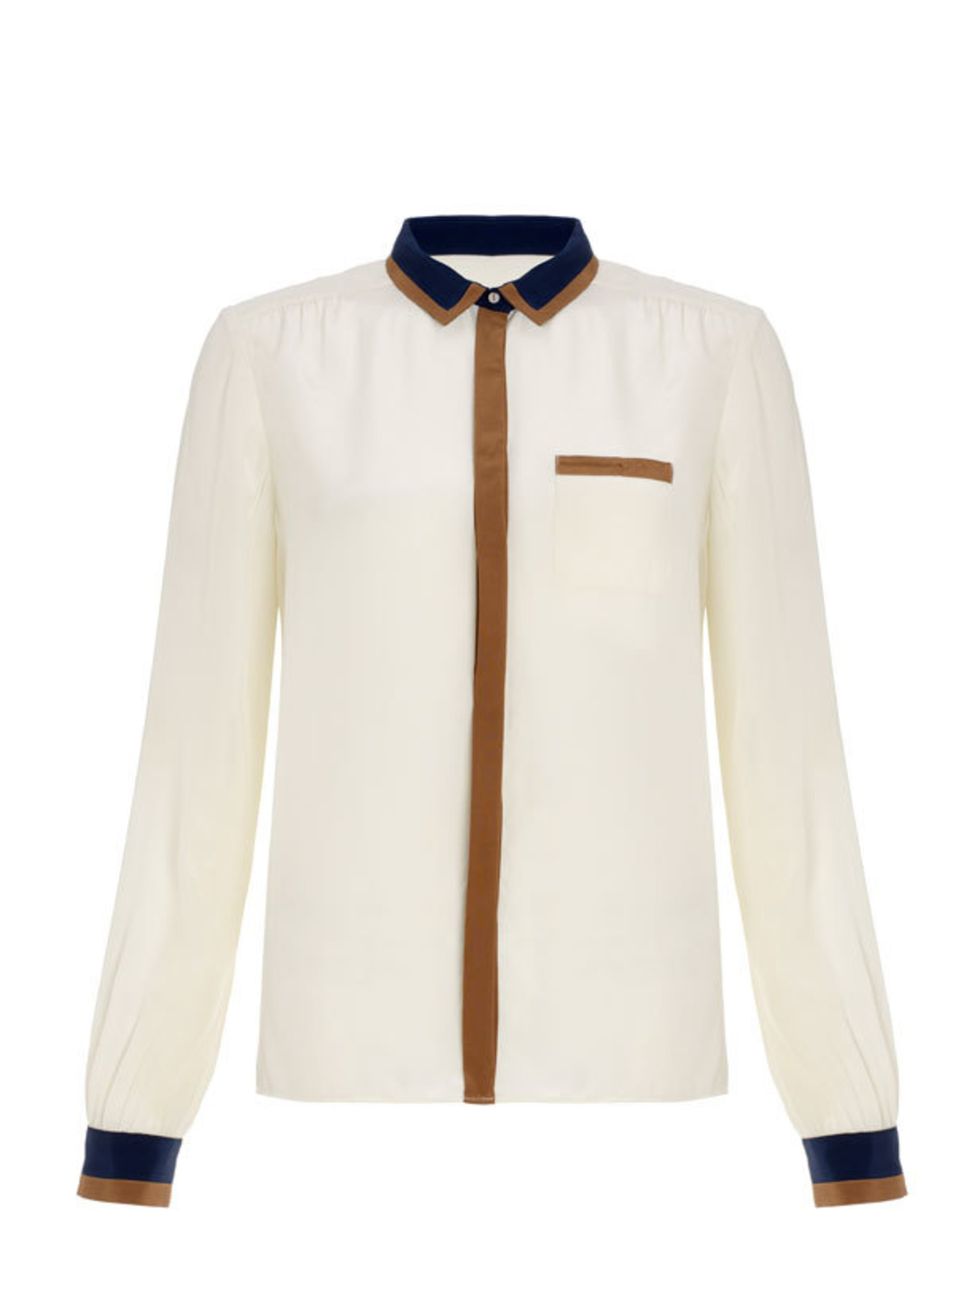 <p>Make the return to work more enjoyable with a chic new blouse <a href="http://www.whistles.co.uk/fcp/categorylist/dept/shop?resetFilters=true">Whistles</a> colour block blouse, £125</p>